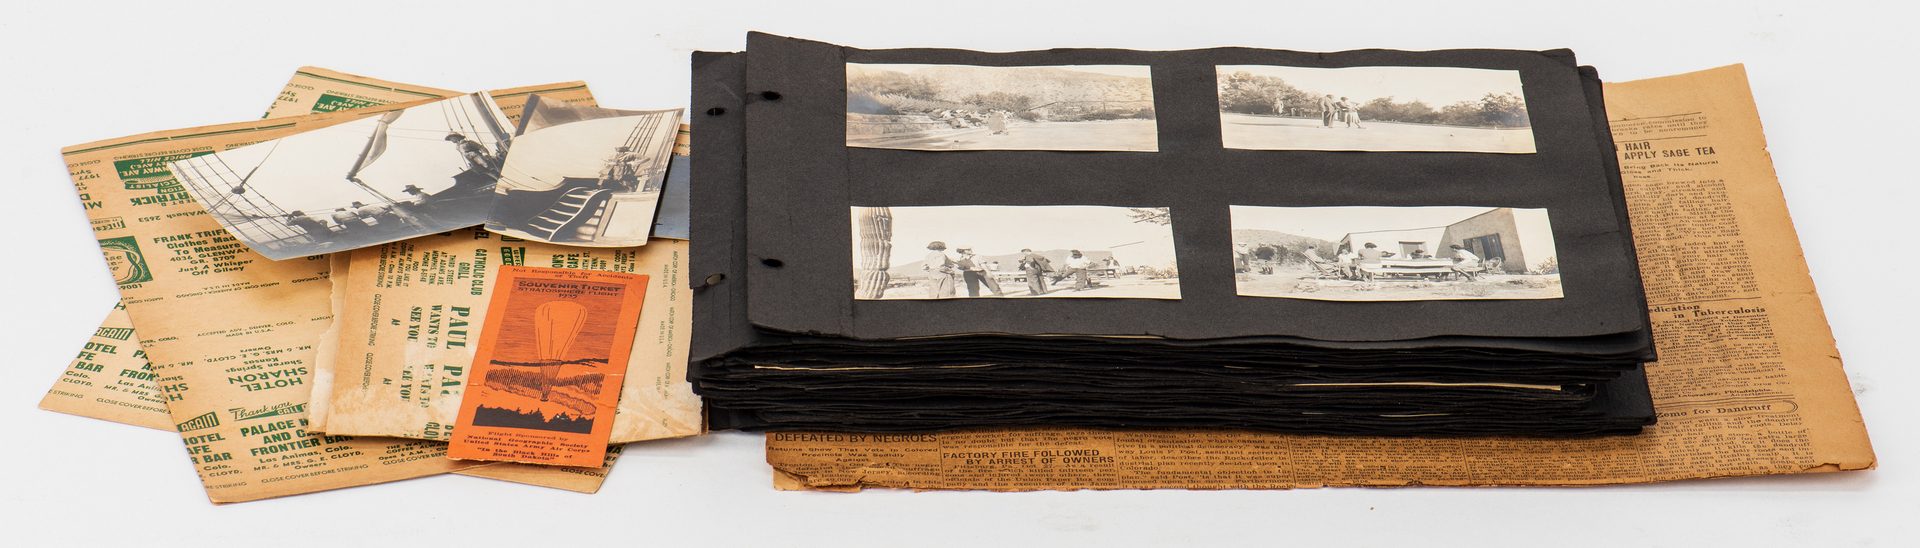 Lot 668: Group of early Western photographs